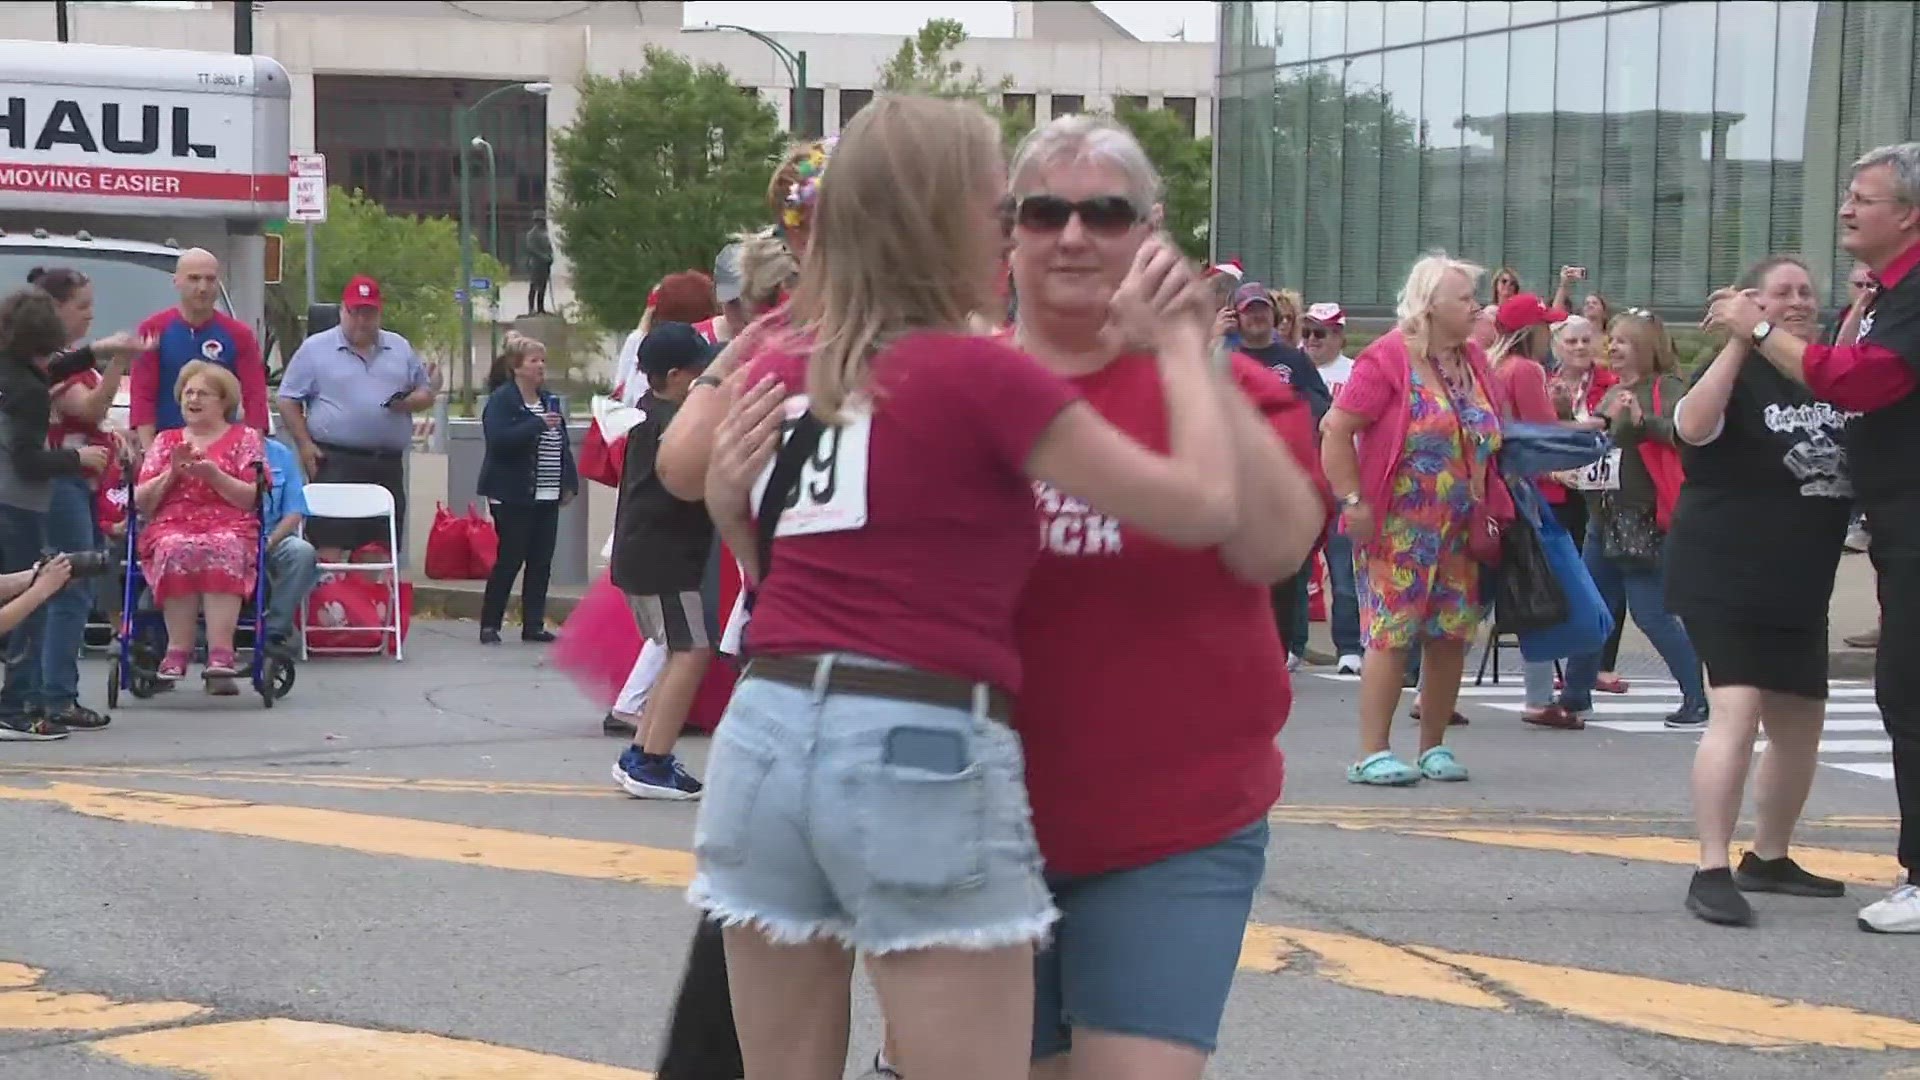 Local polish groups in Buffalo were hoping to break the largest Polka dance world record this weekend.